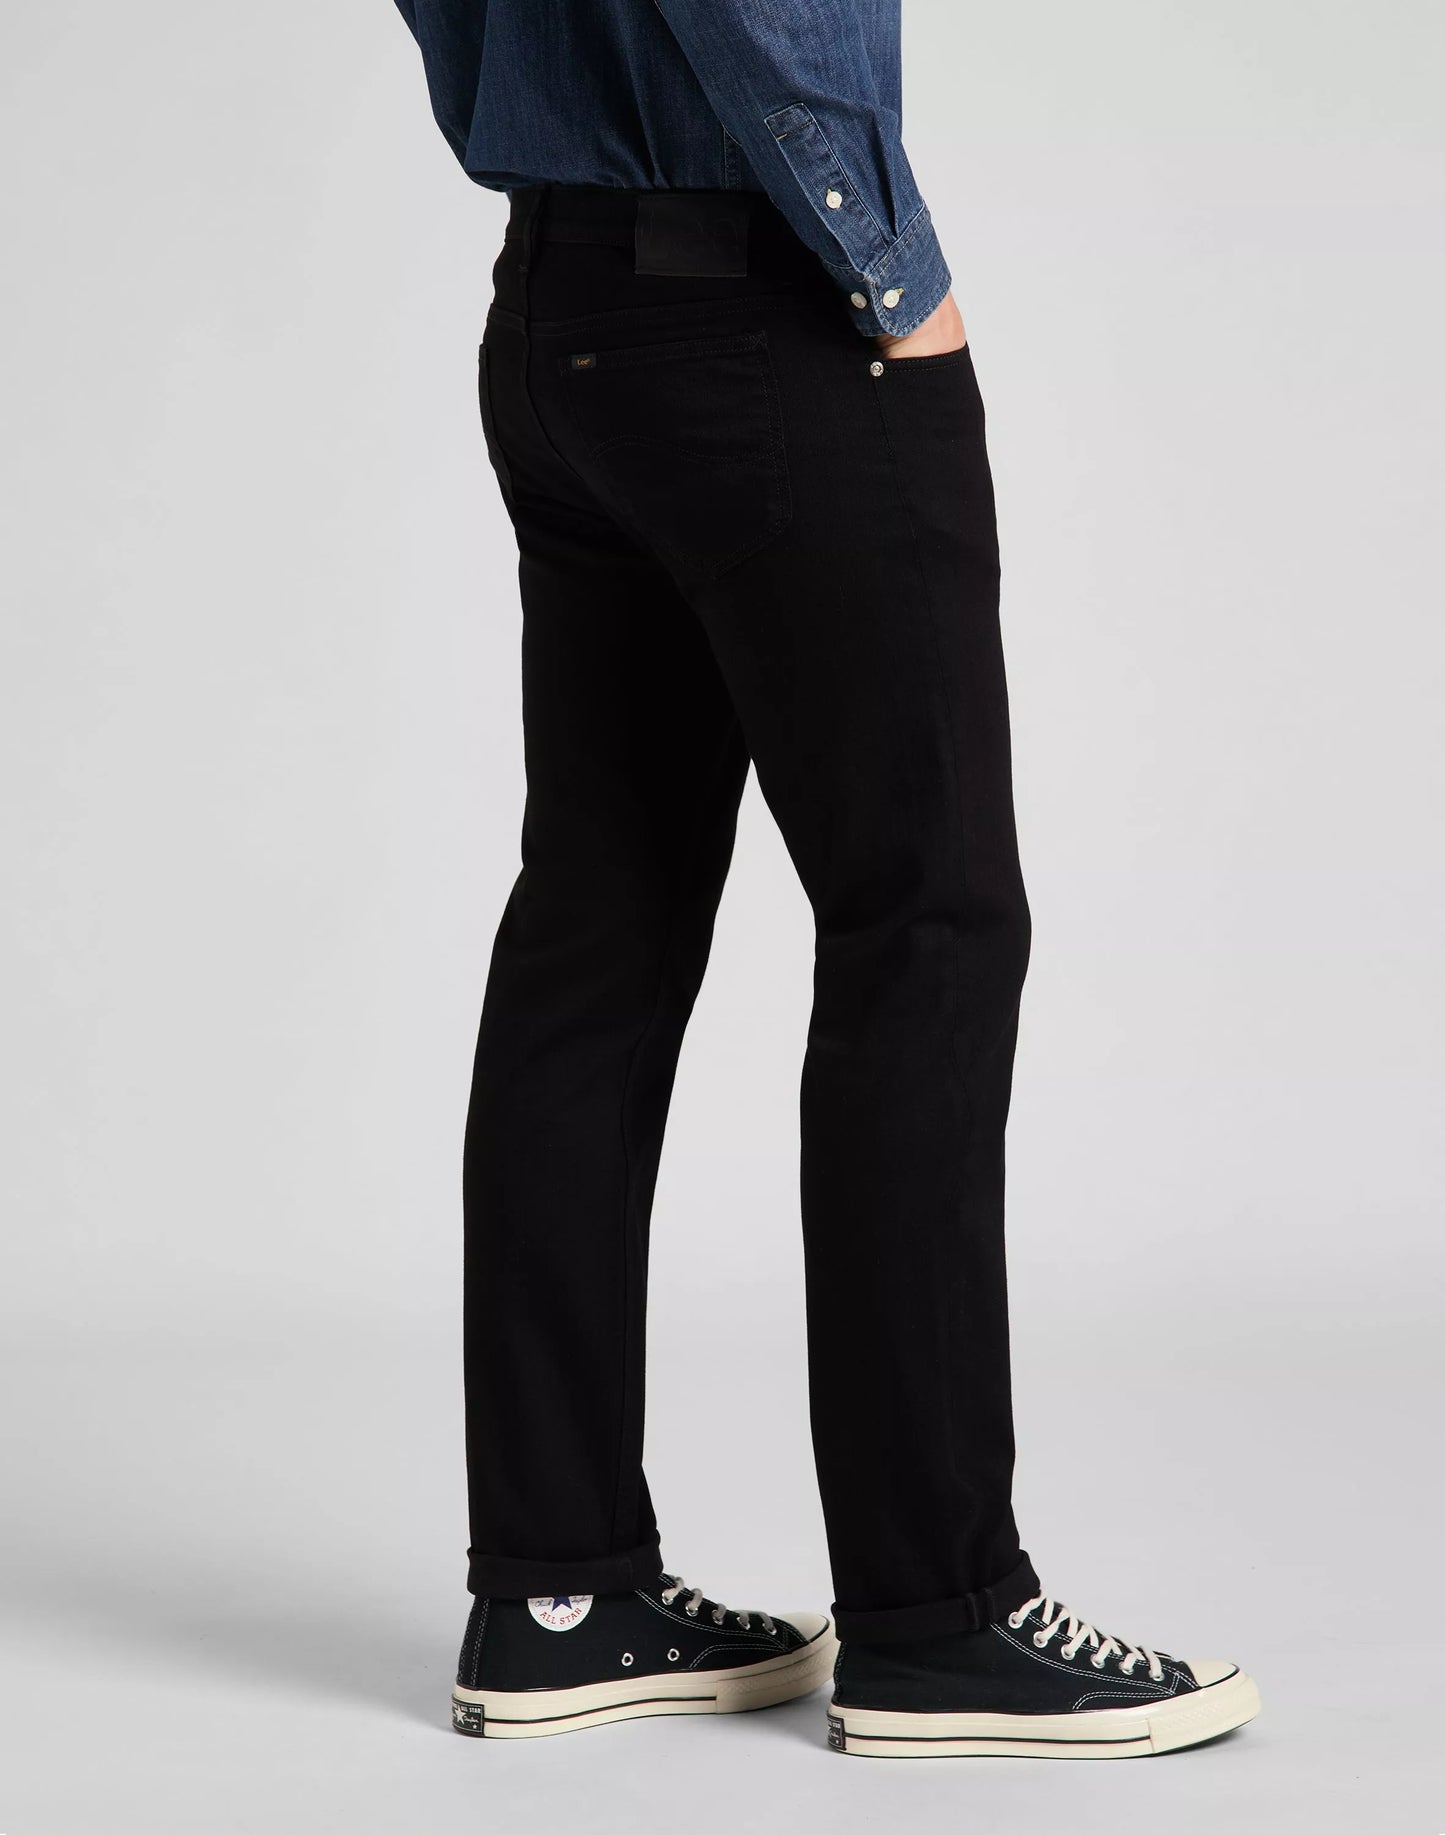 Lee Jeans Daren Straight Fit in Clean Black - RD1 Clothing